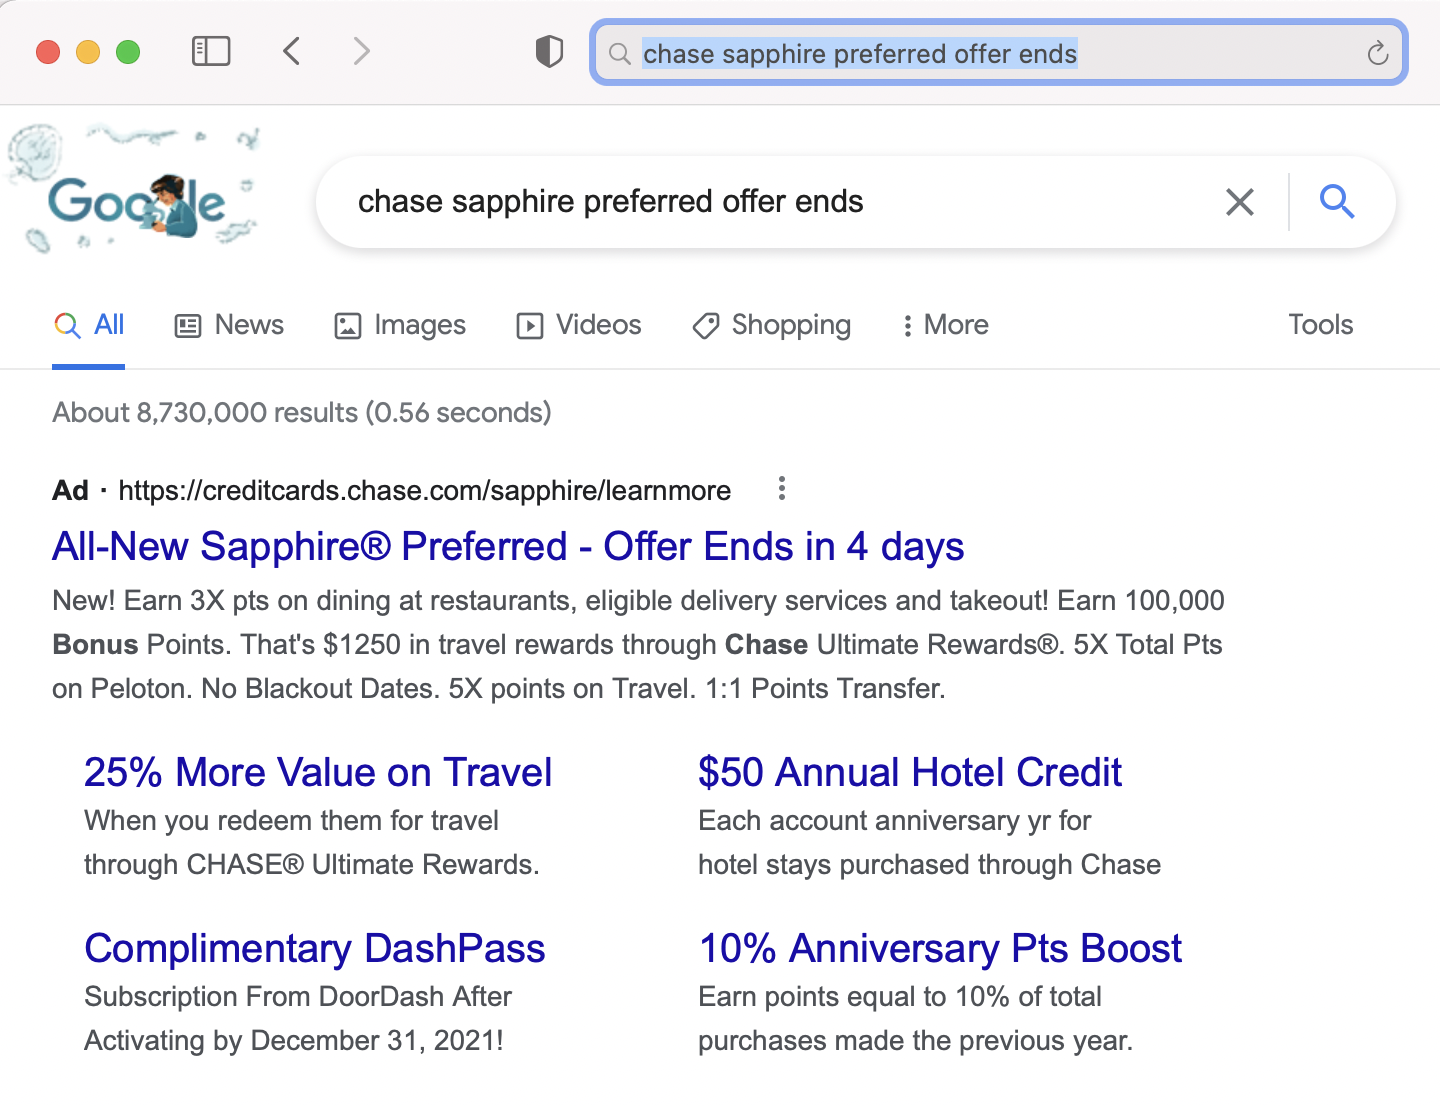 When Will The Chase Sapphire Preferred Offer End for 100,000 Points?